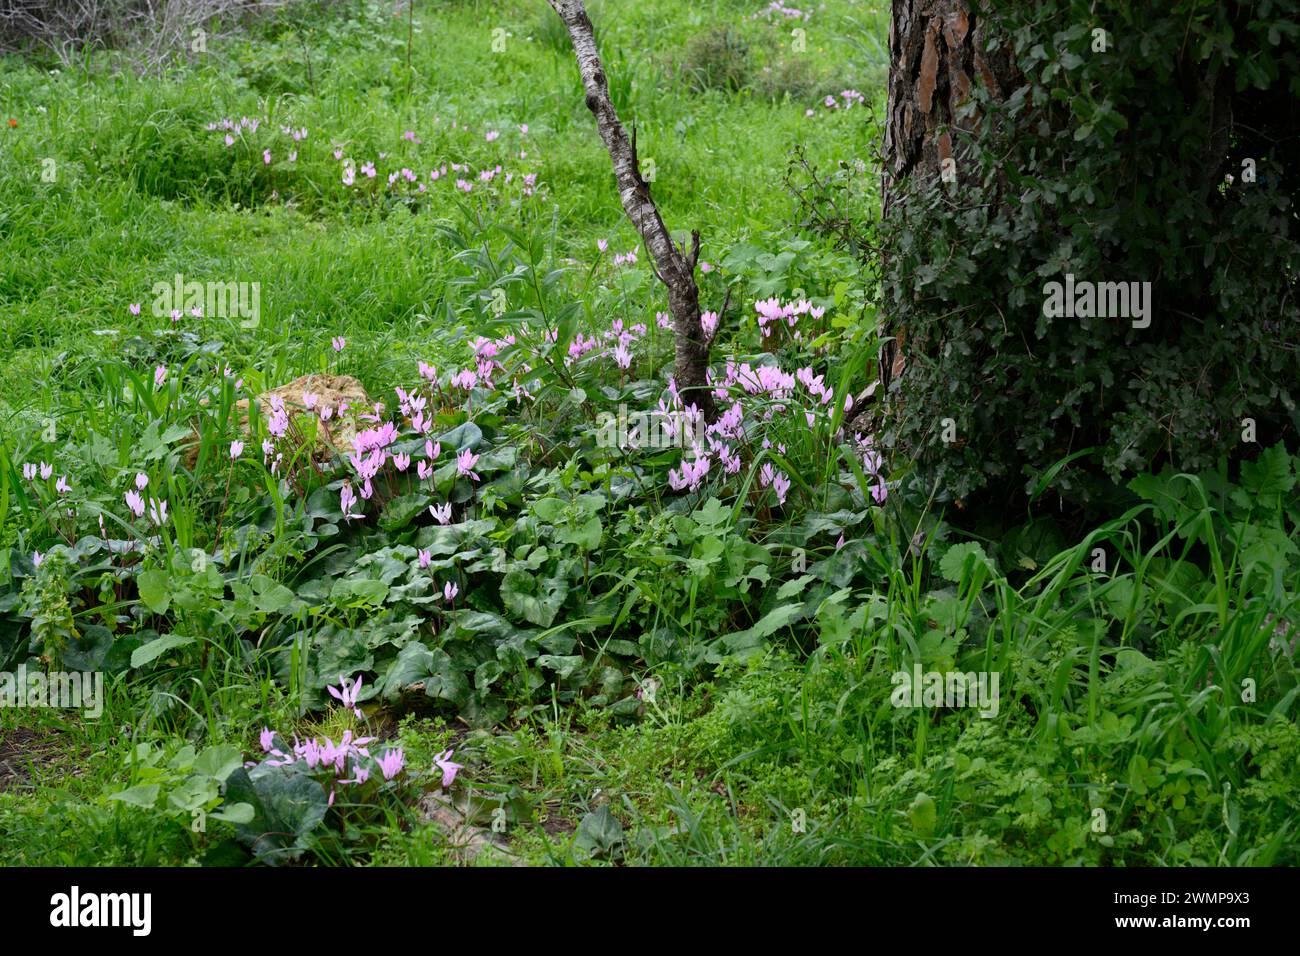 Flowering spring meadow, in a pine tree forest with lush green foliage and an assortment of wildflowers Photographed in the Jerusalem Hills Stock Photo